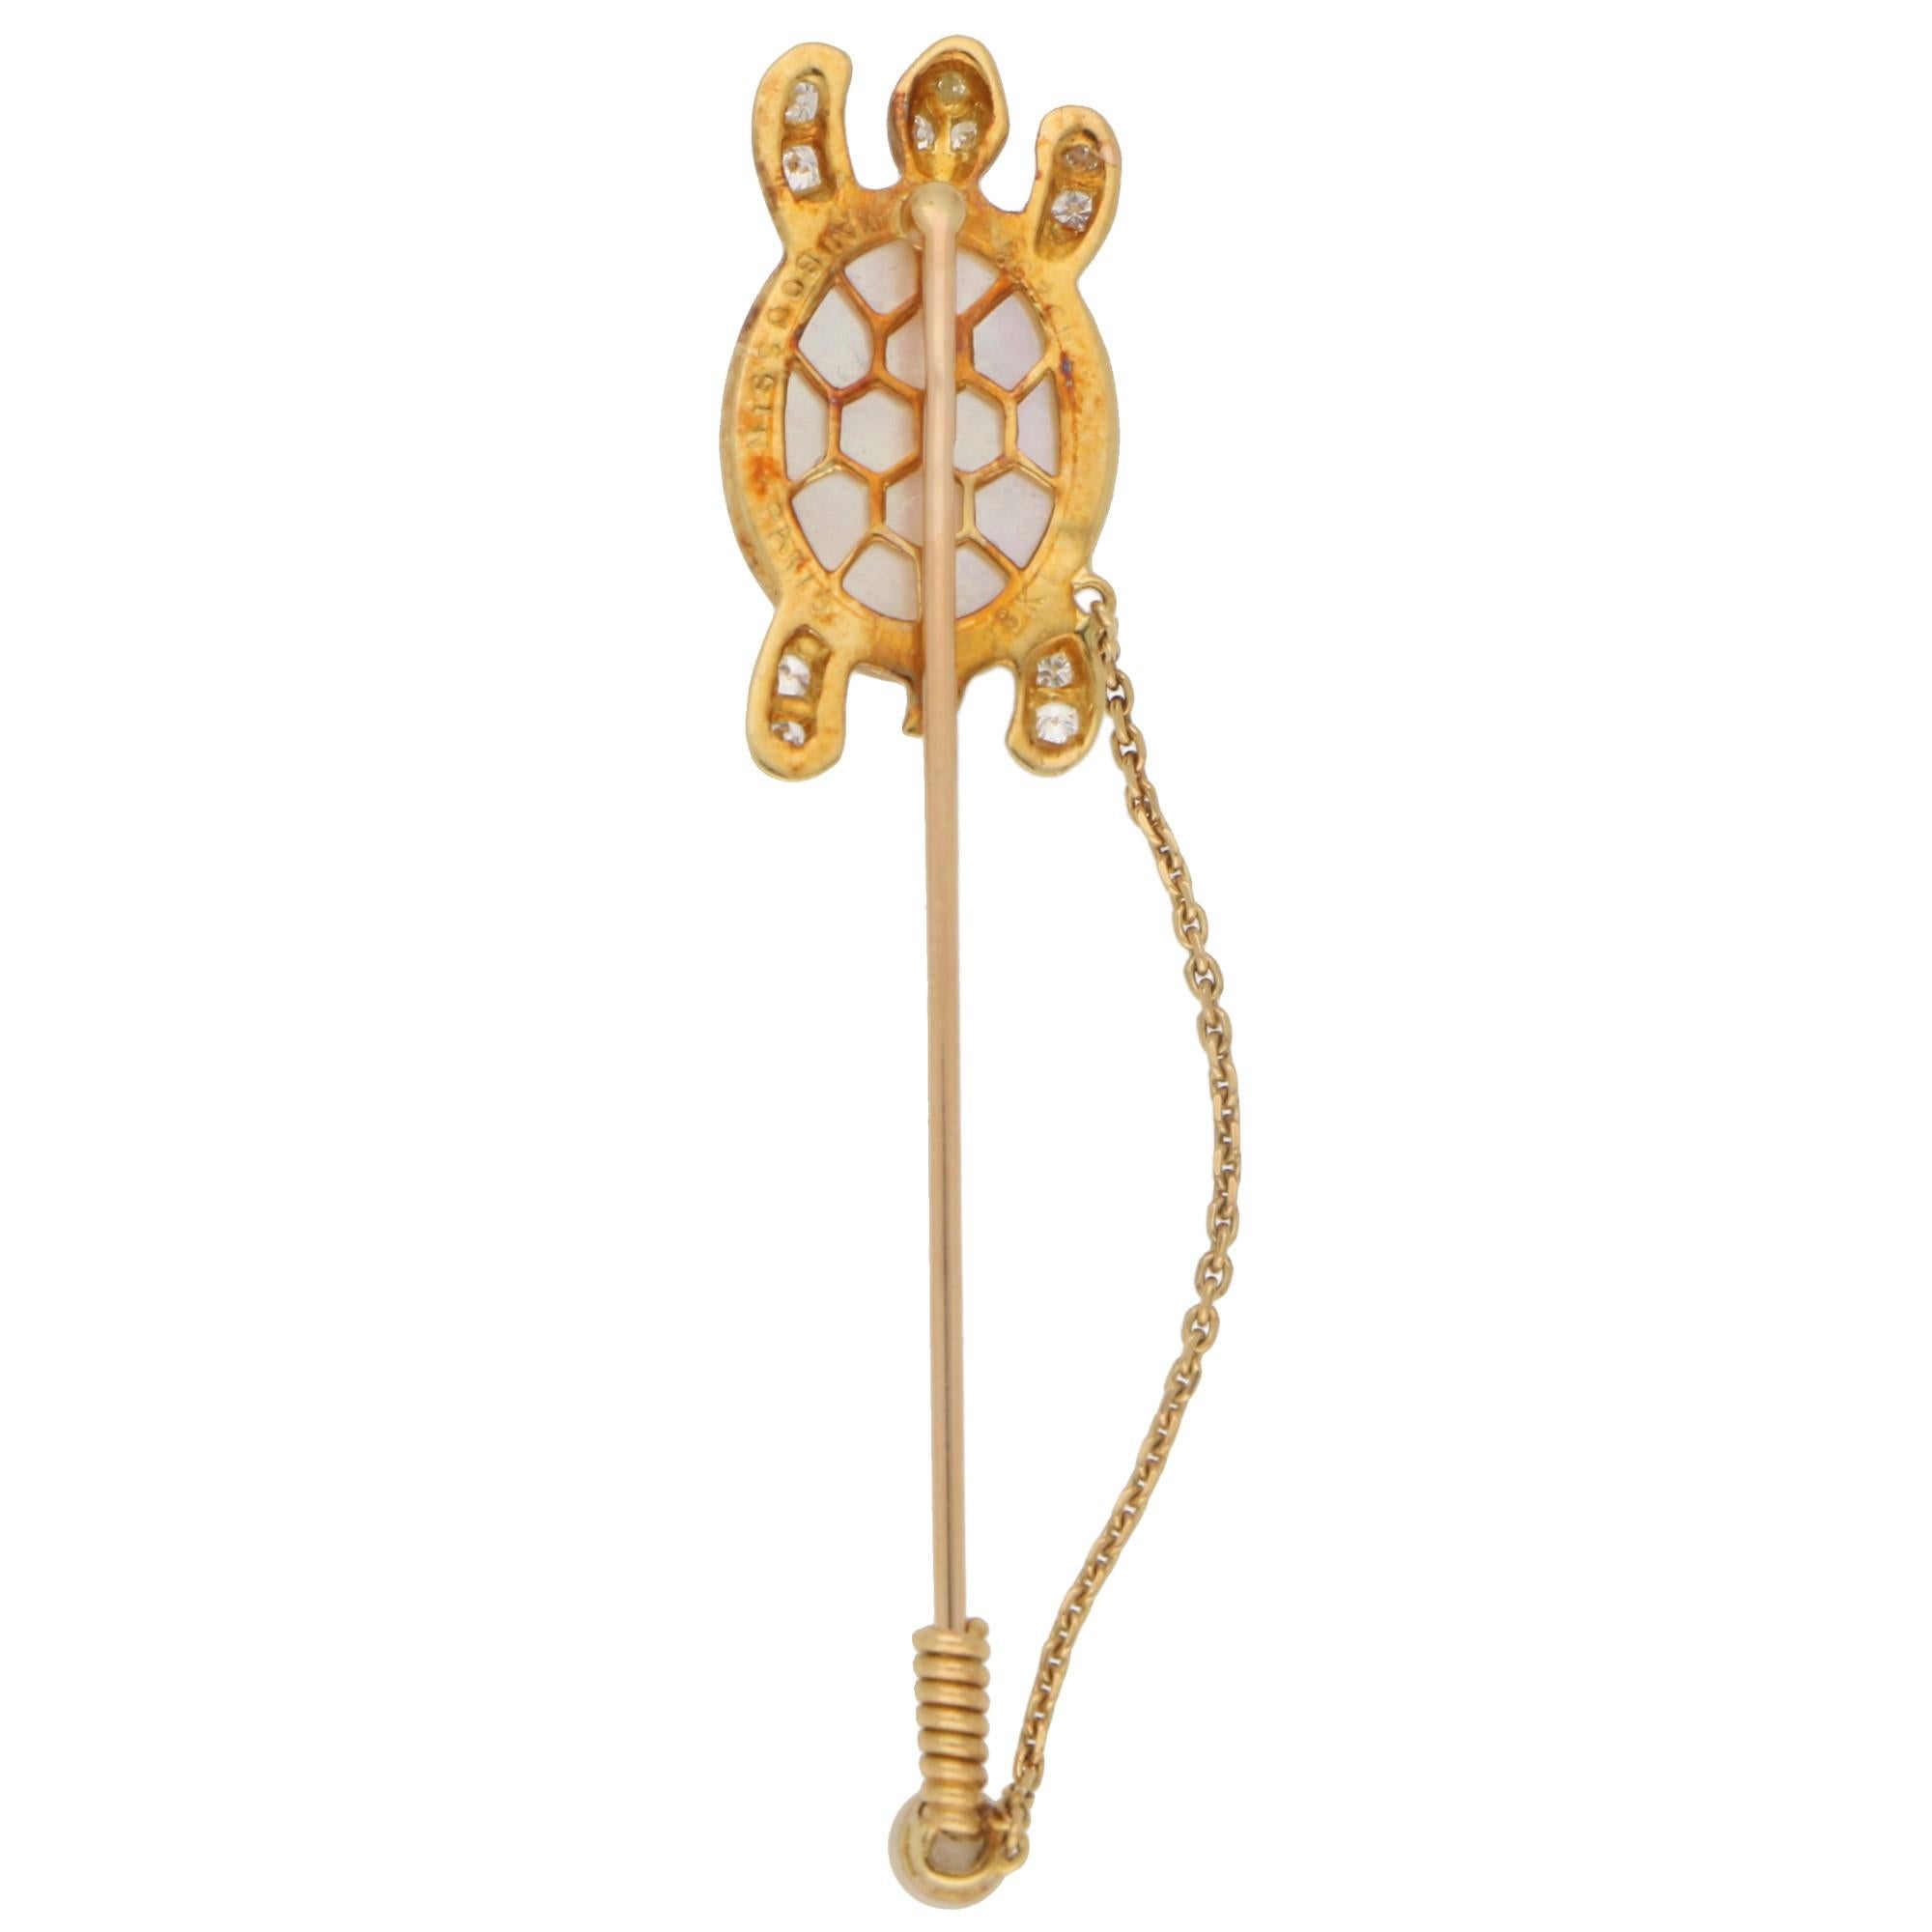 A lovely little moonstone and diamond stick pin set in 18k yellow gold, signed Mauboussin. 

The stick pink depicts a walking turtle and is composed of a large carved piece of lustrous moonstone. This moonstone forms the shell of the turtle and is